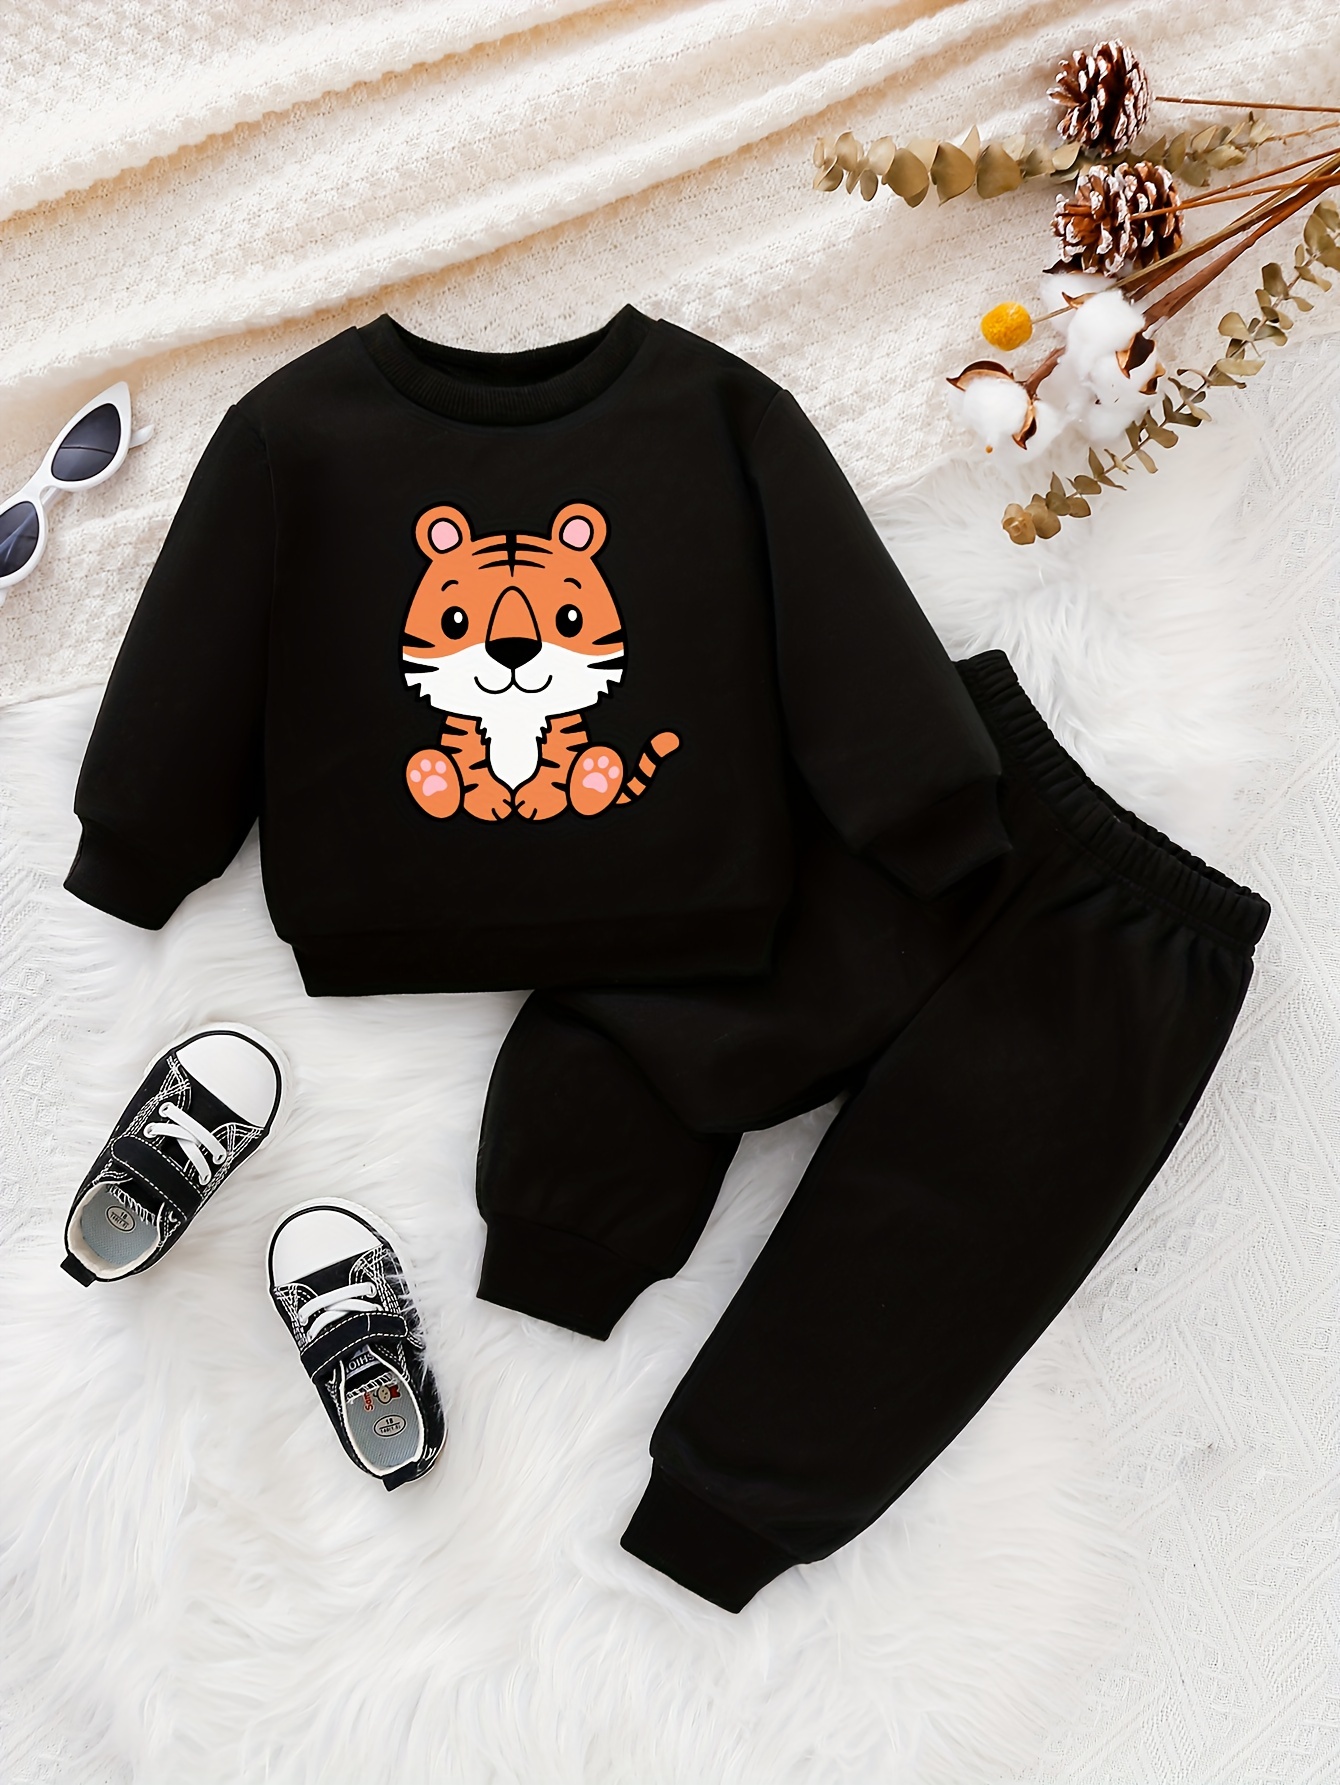 2pcs Baby Boy Cartoon Elephant and Letter Print Long-sleeve T-shirt with Trousers Set